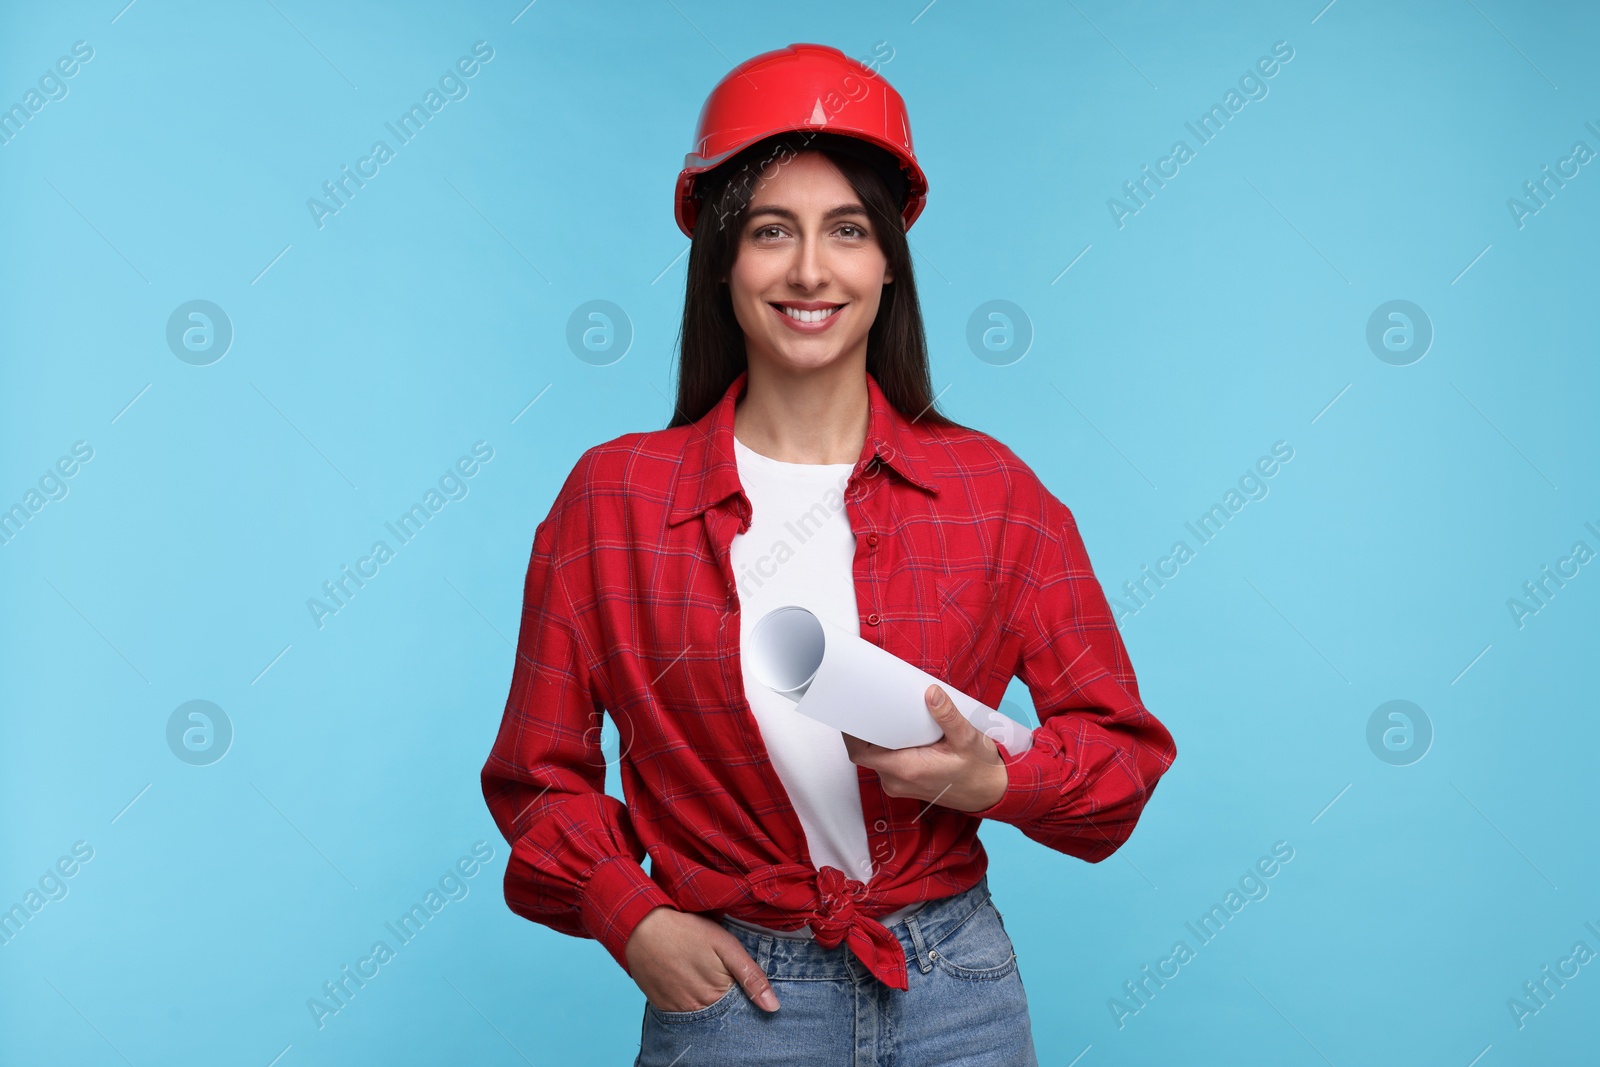 Photo of Architect in hard hat with draft on light blue background